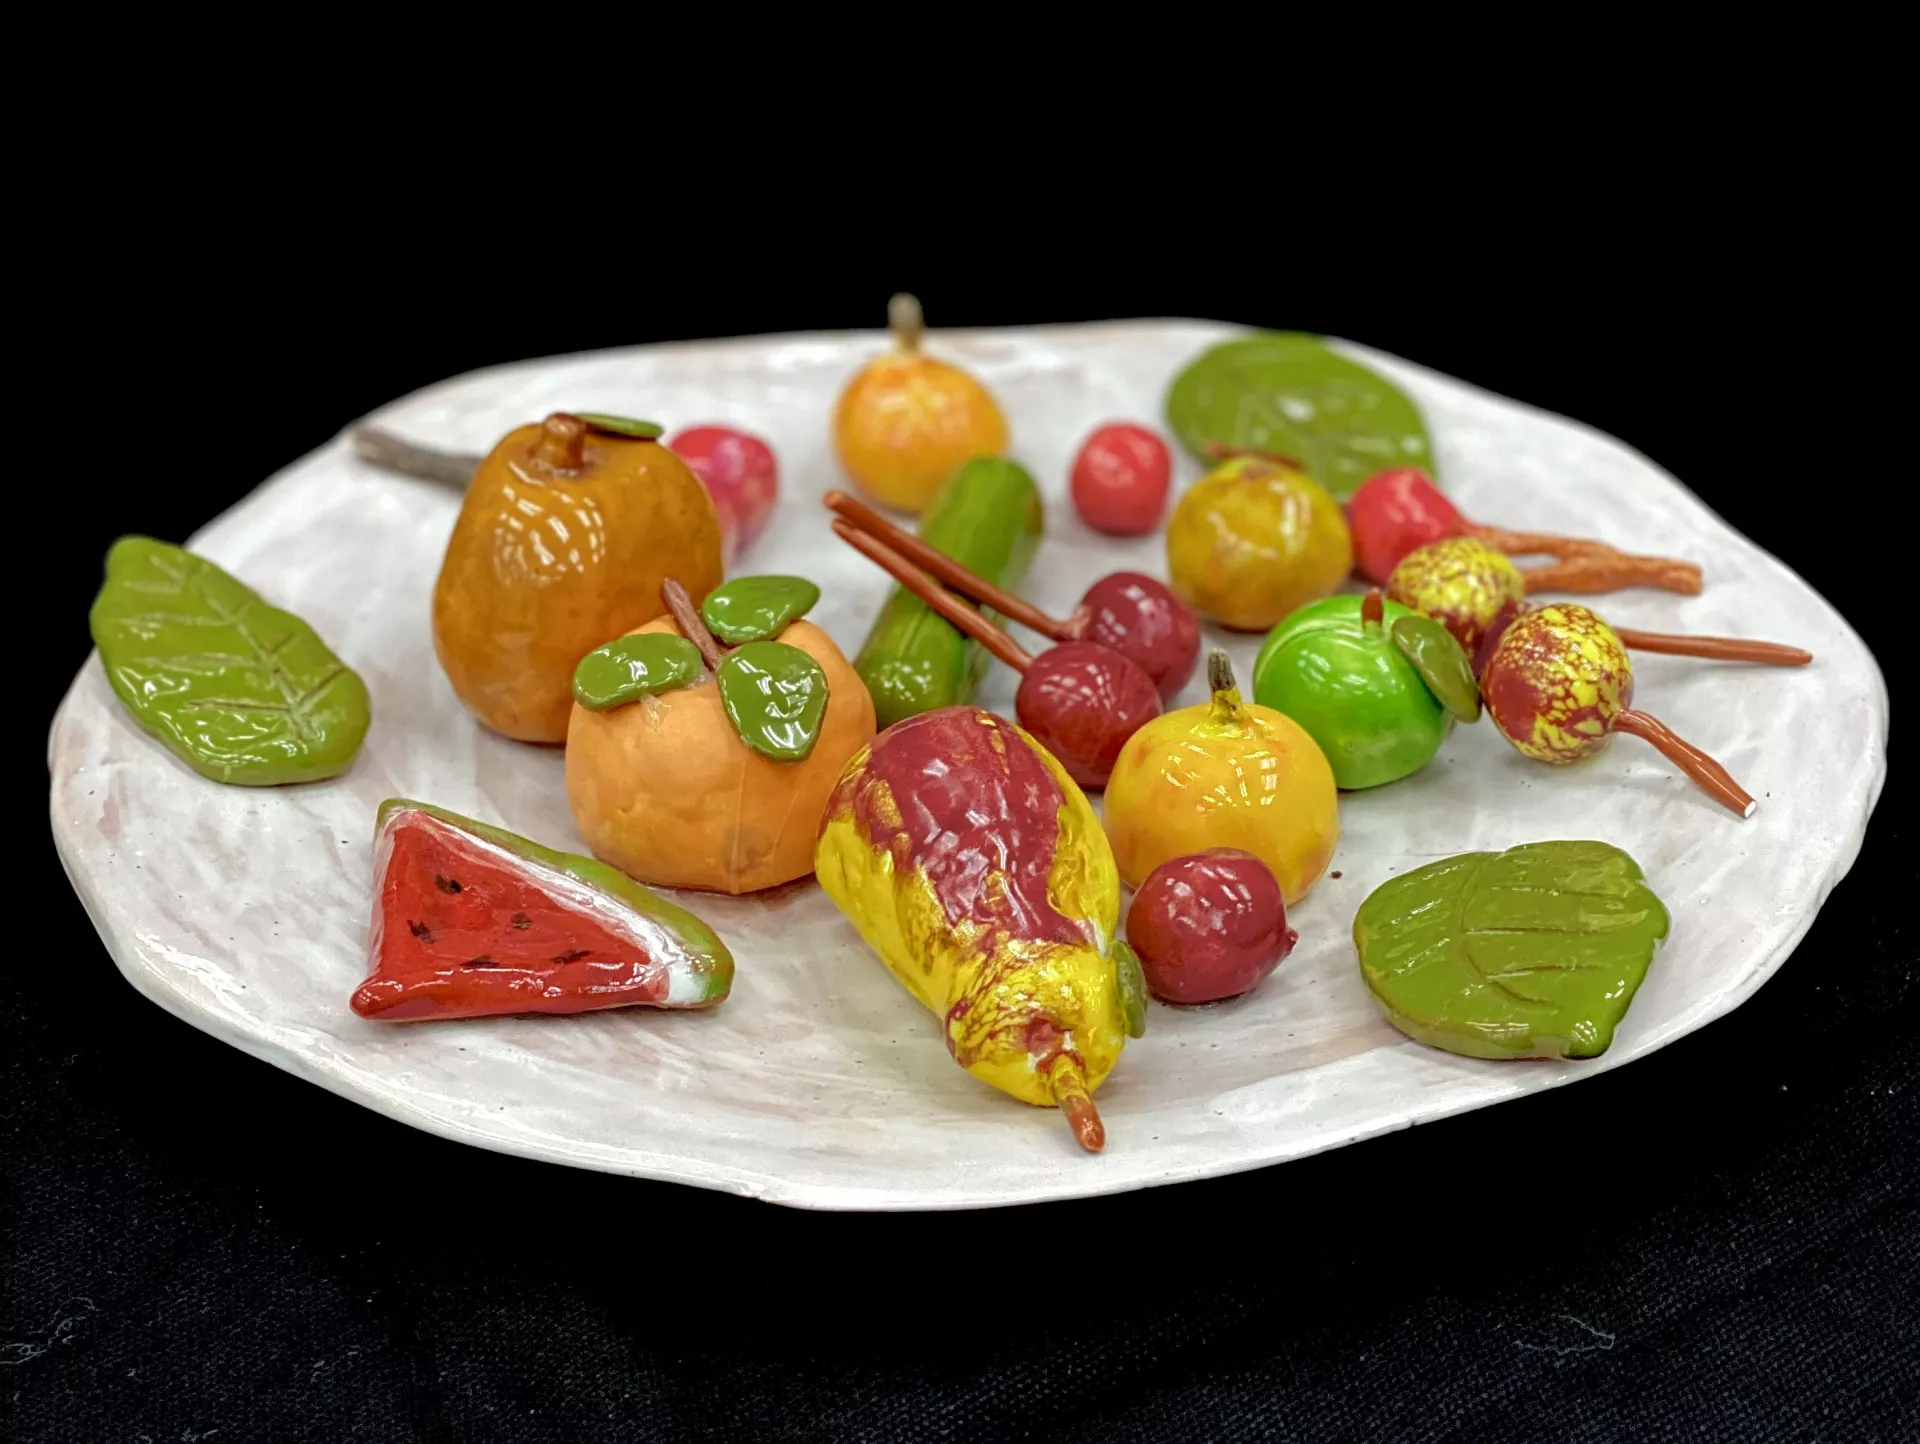 Anet Shahbandari Fruit plate, 2020 The two photographs depict a ceramic sculpture of a plate of intensely colored fruit: citrus fruit, cherries, a slice of watermelon, and decorative green leaves.On photograph is taken from directly above and the other forward tilted angle.  Ceramic, 12” x 12” x 3"